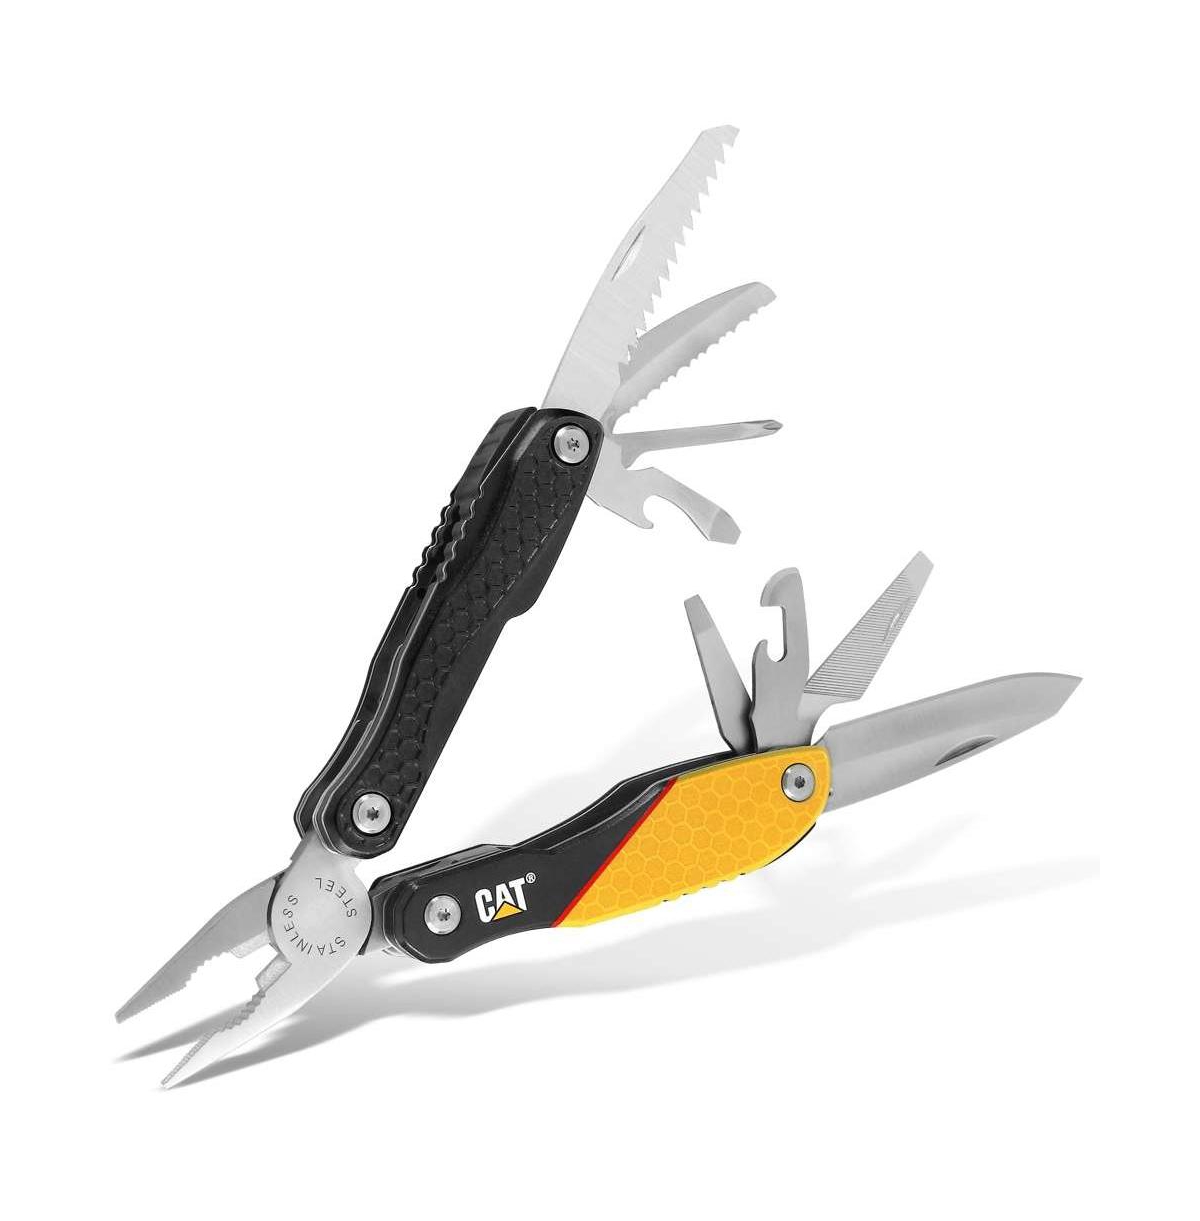 13-in-1 Multi-Tool with Pliers